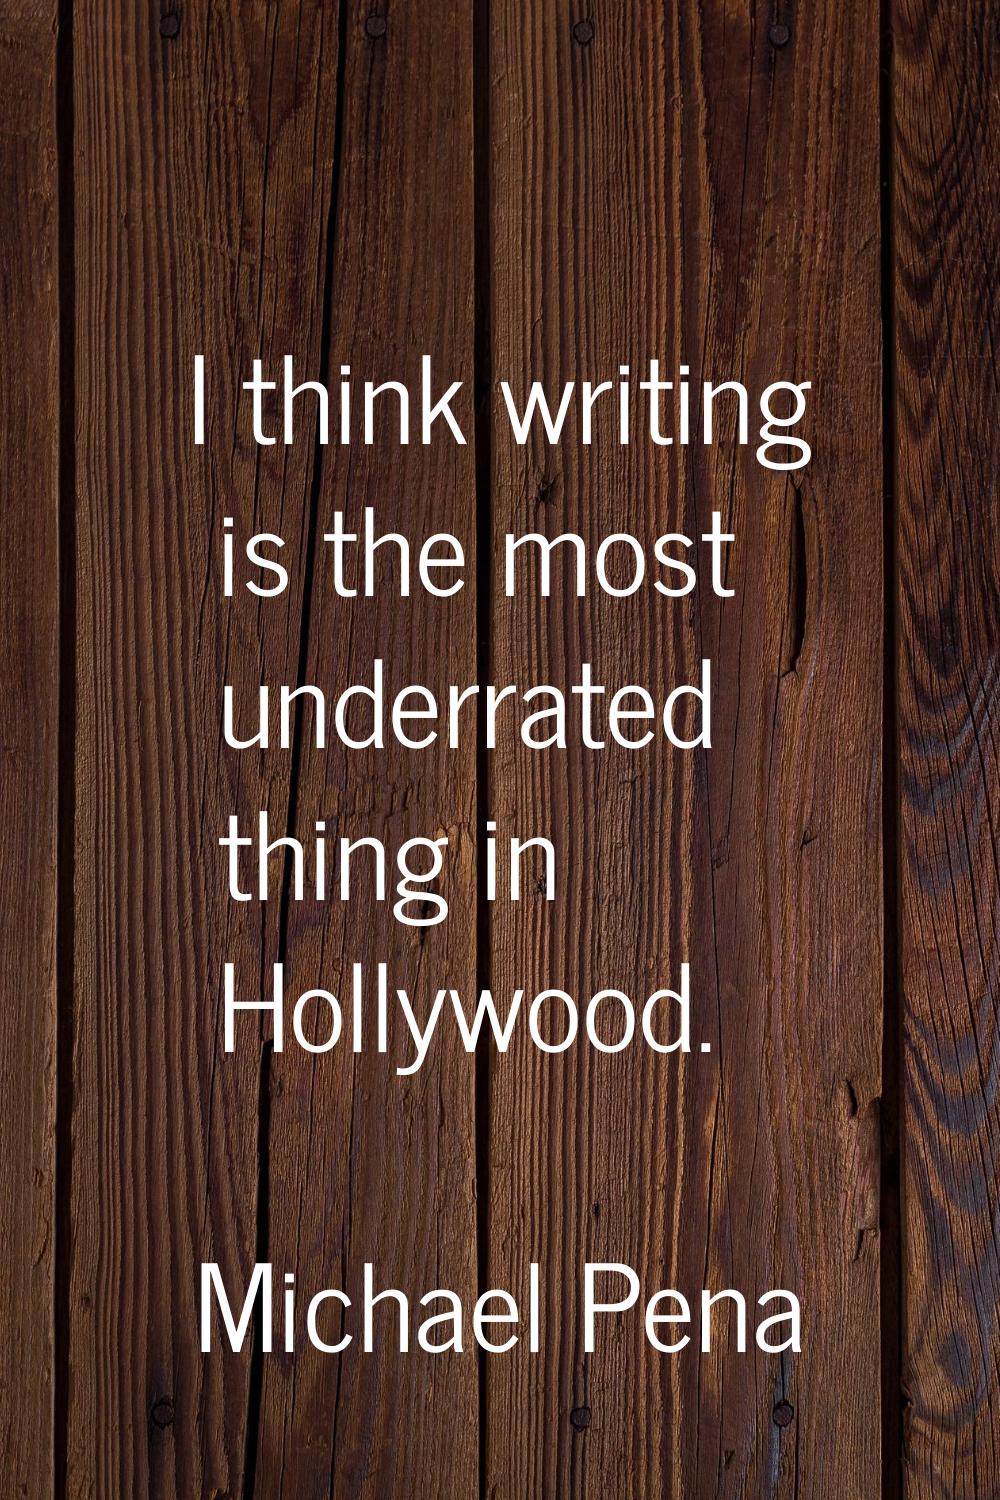 I think writing is the most underrated thing in Hollywood.